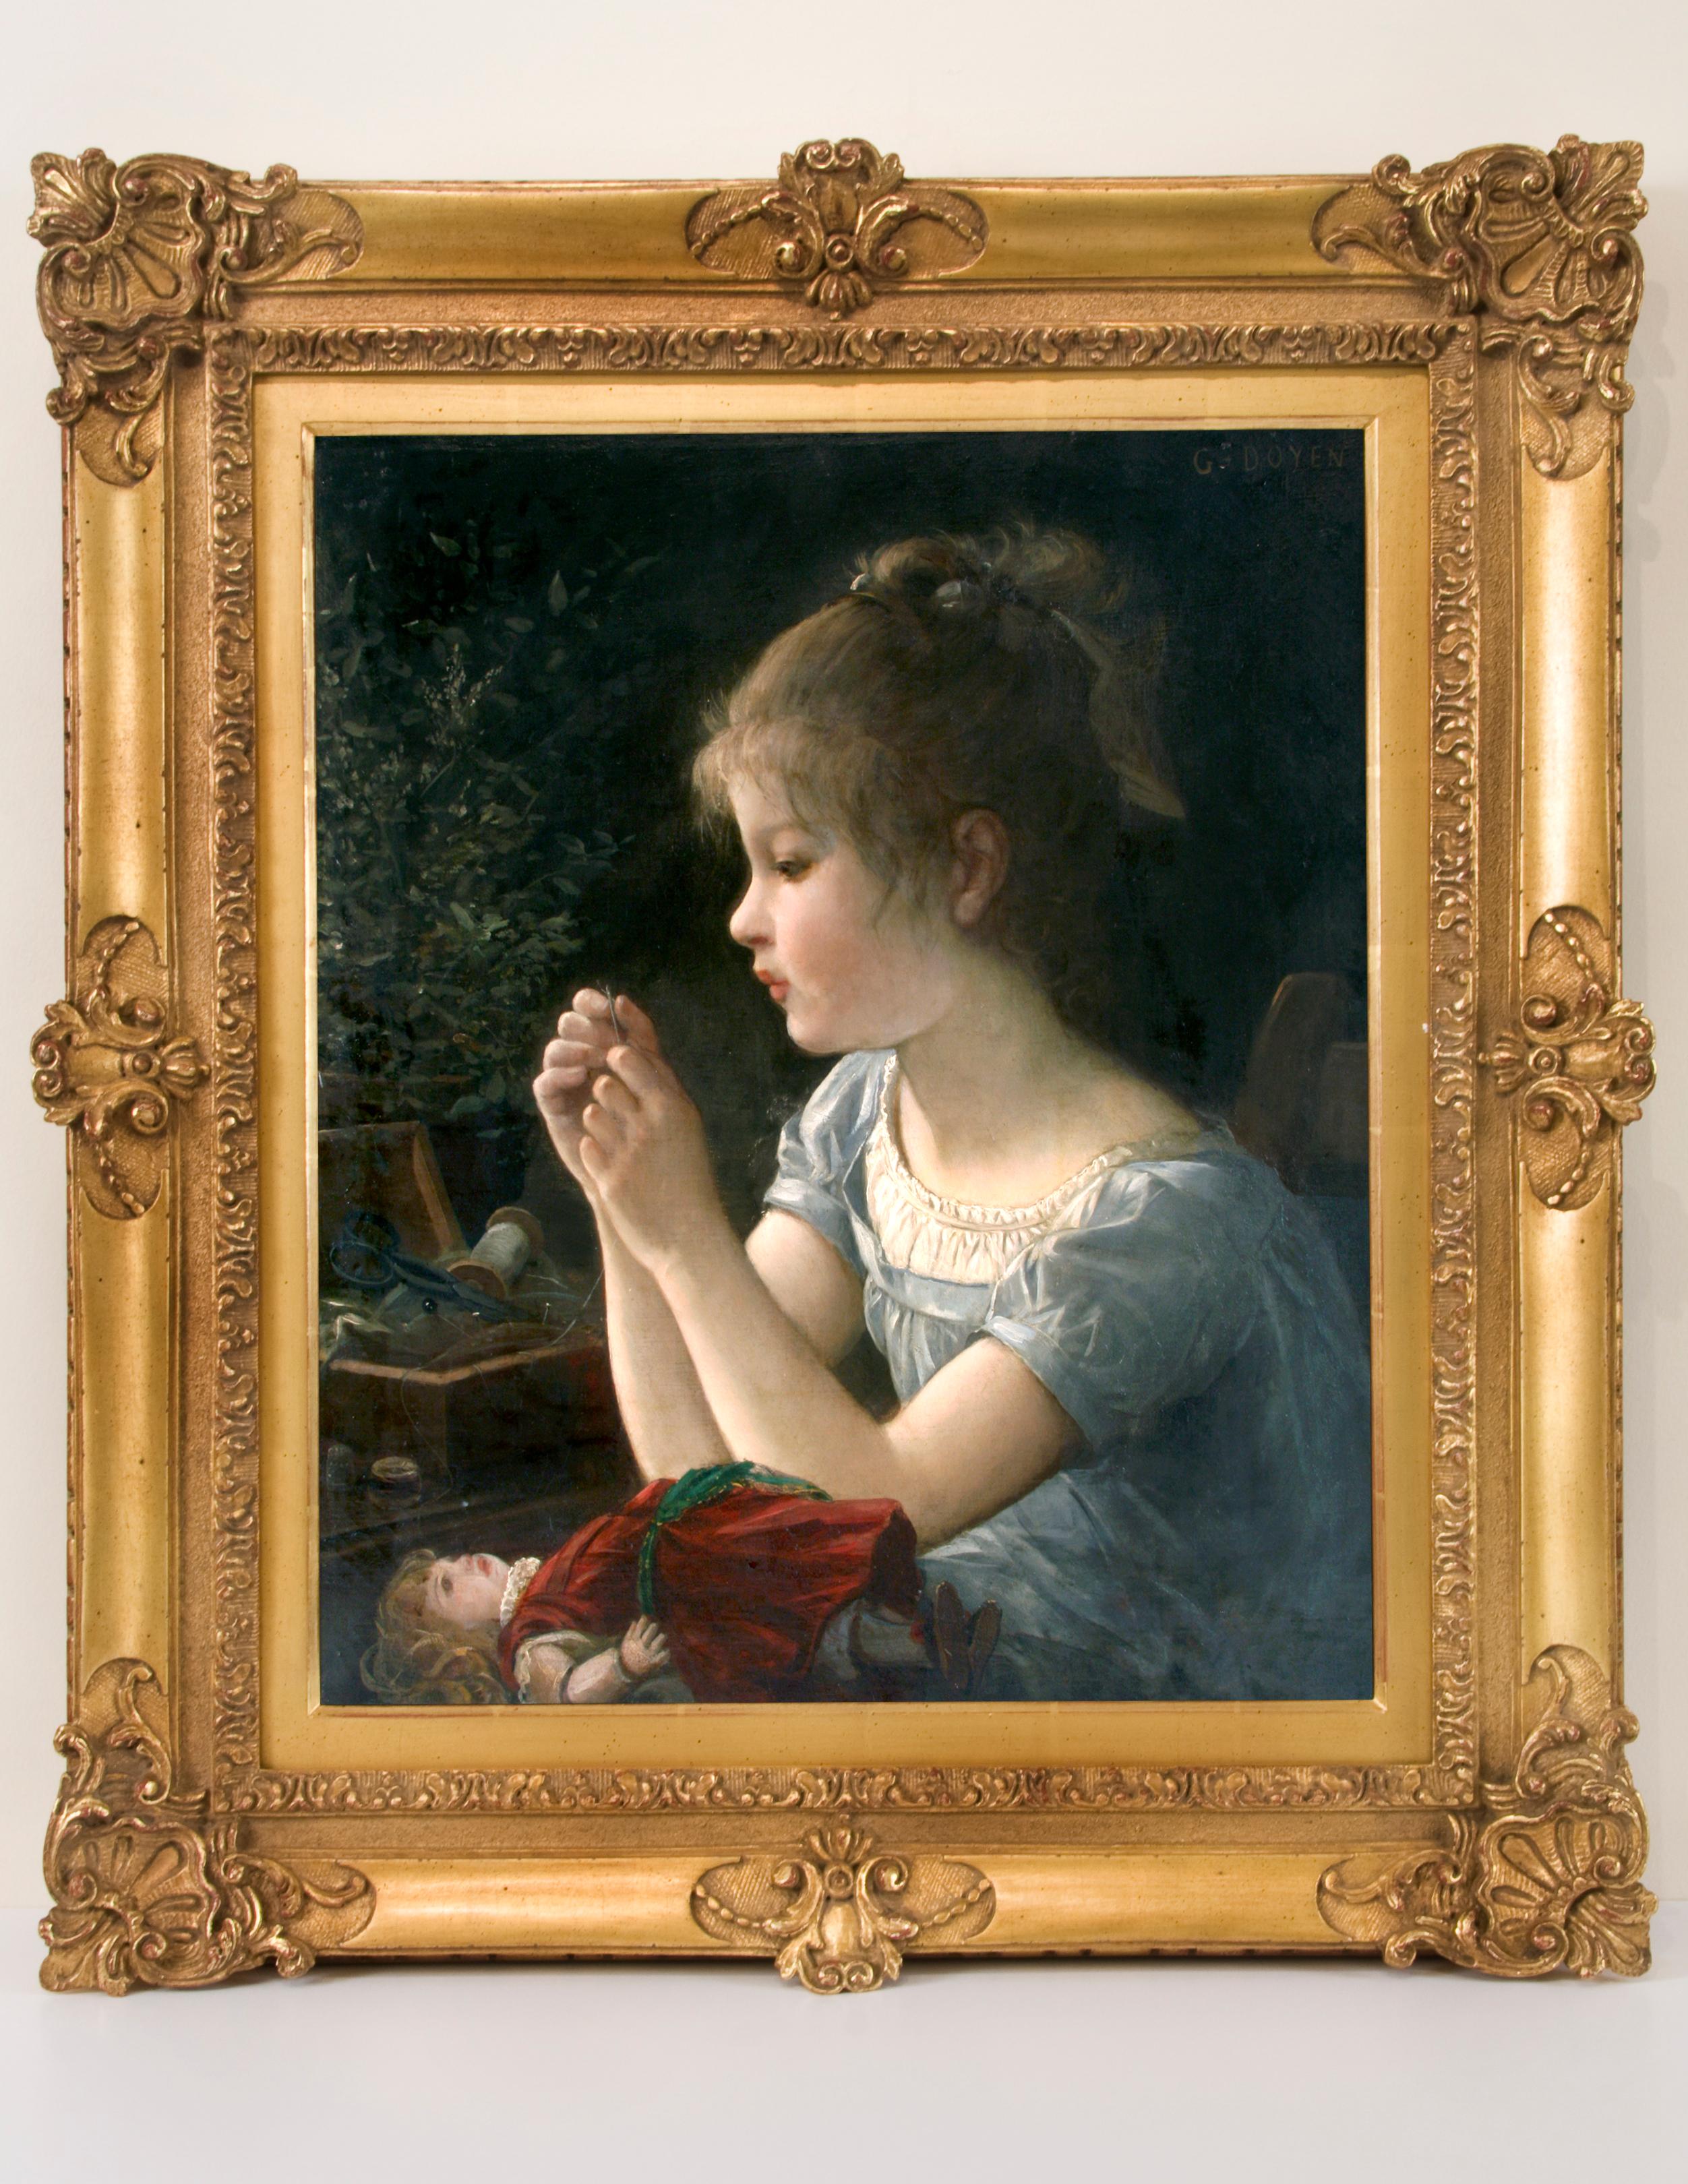 Charming example of nineteenth-century genre painting depicting a young girl, her doll, and sewing.   